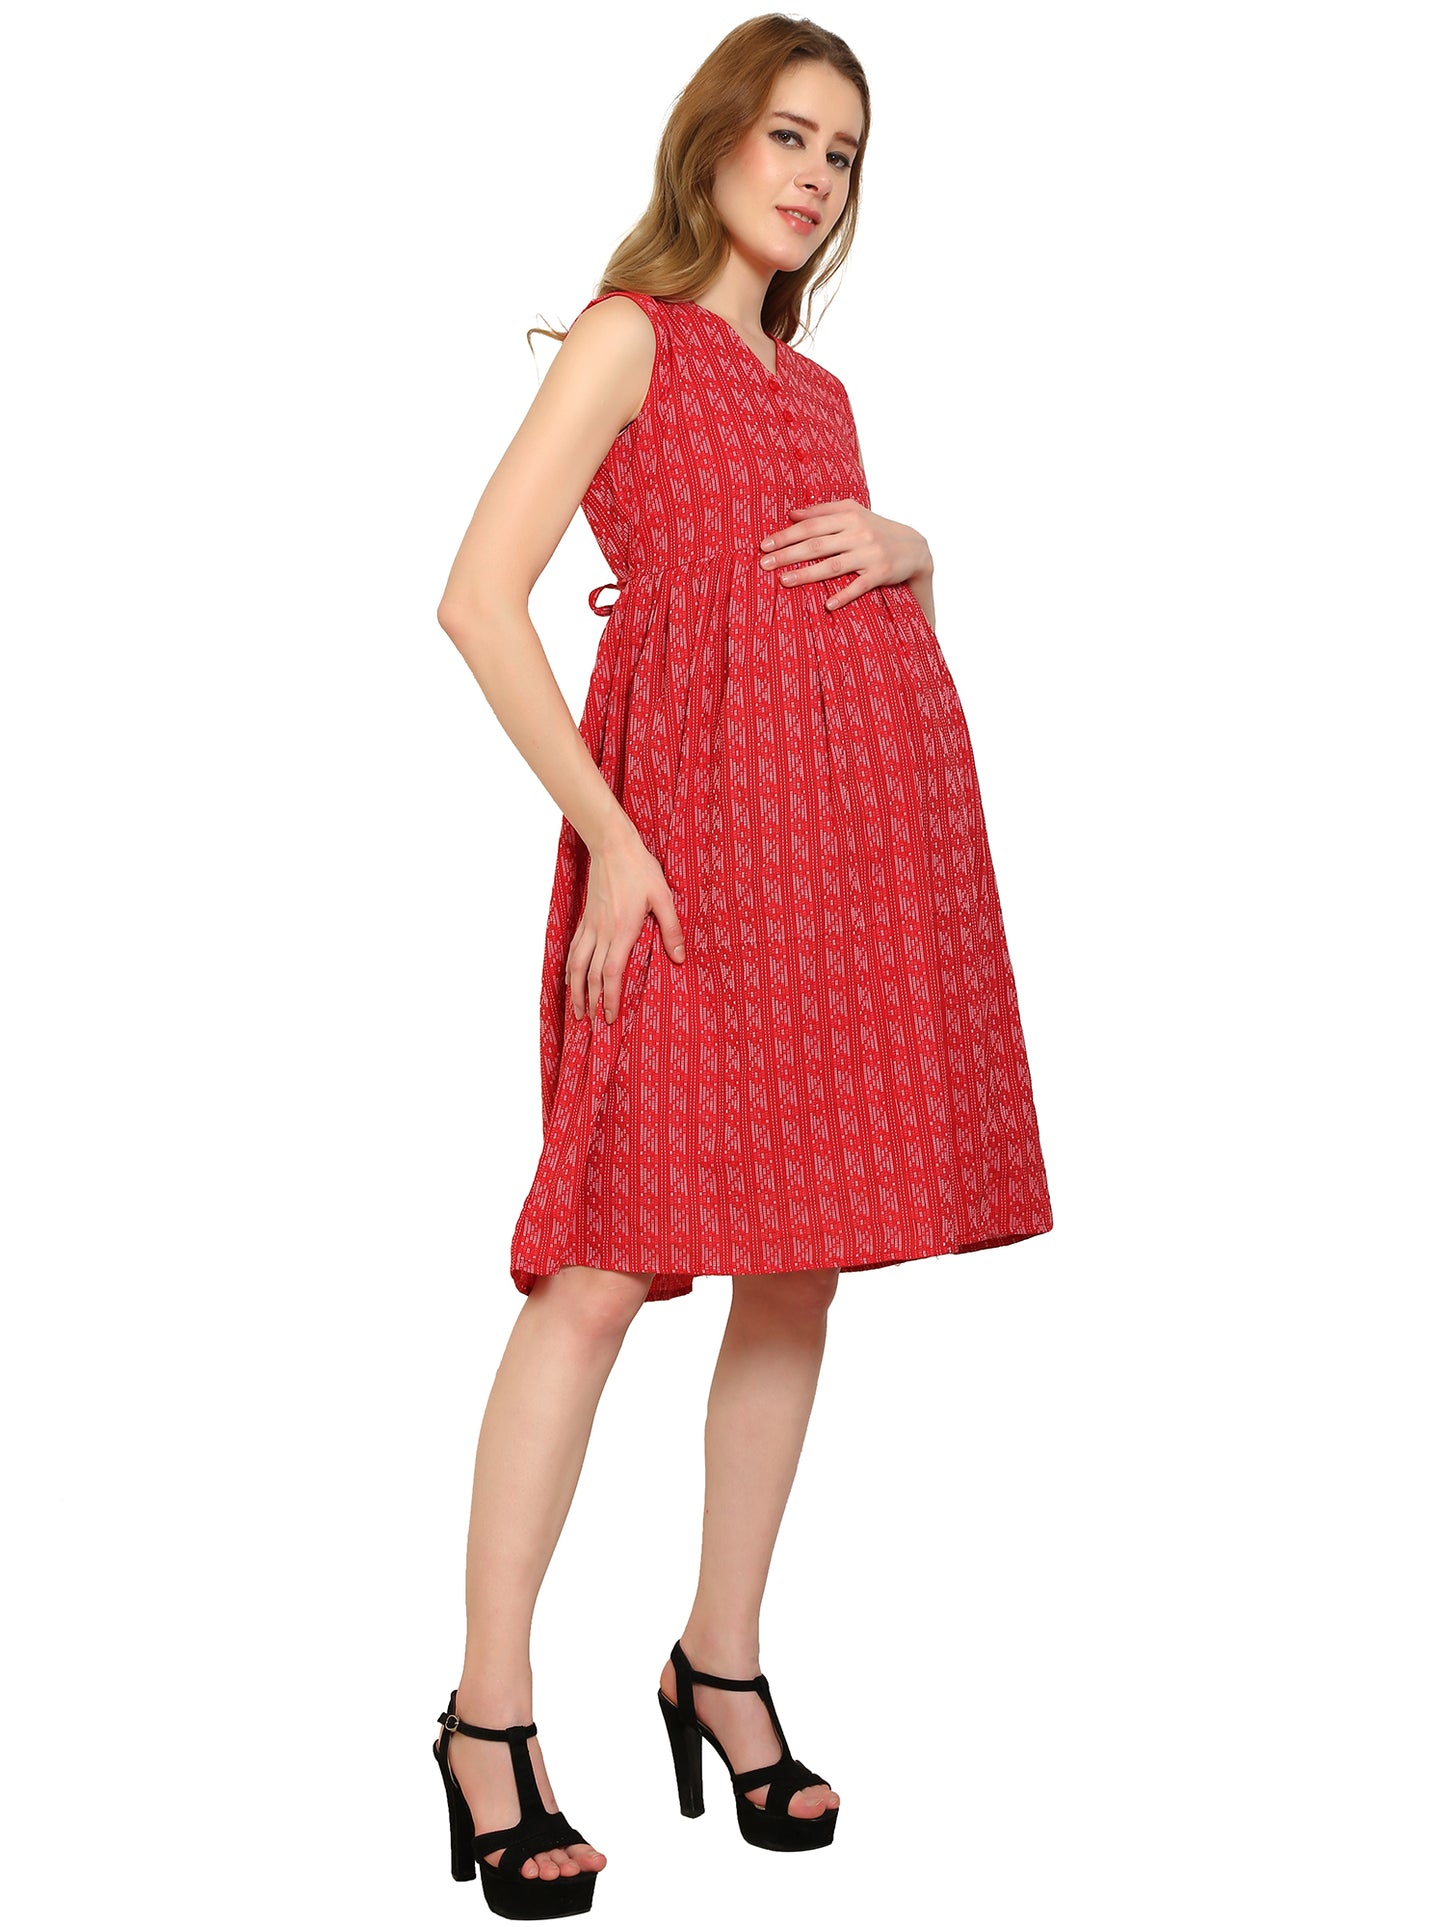 Maternity Dress | Pure Cotton | Katha Print Red Color Dress | Feeding Dress | Pre and Post Pregnancy